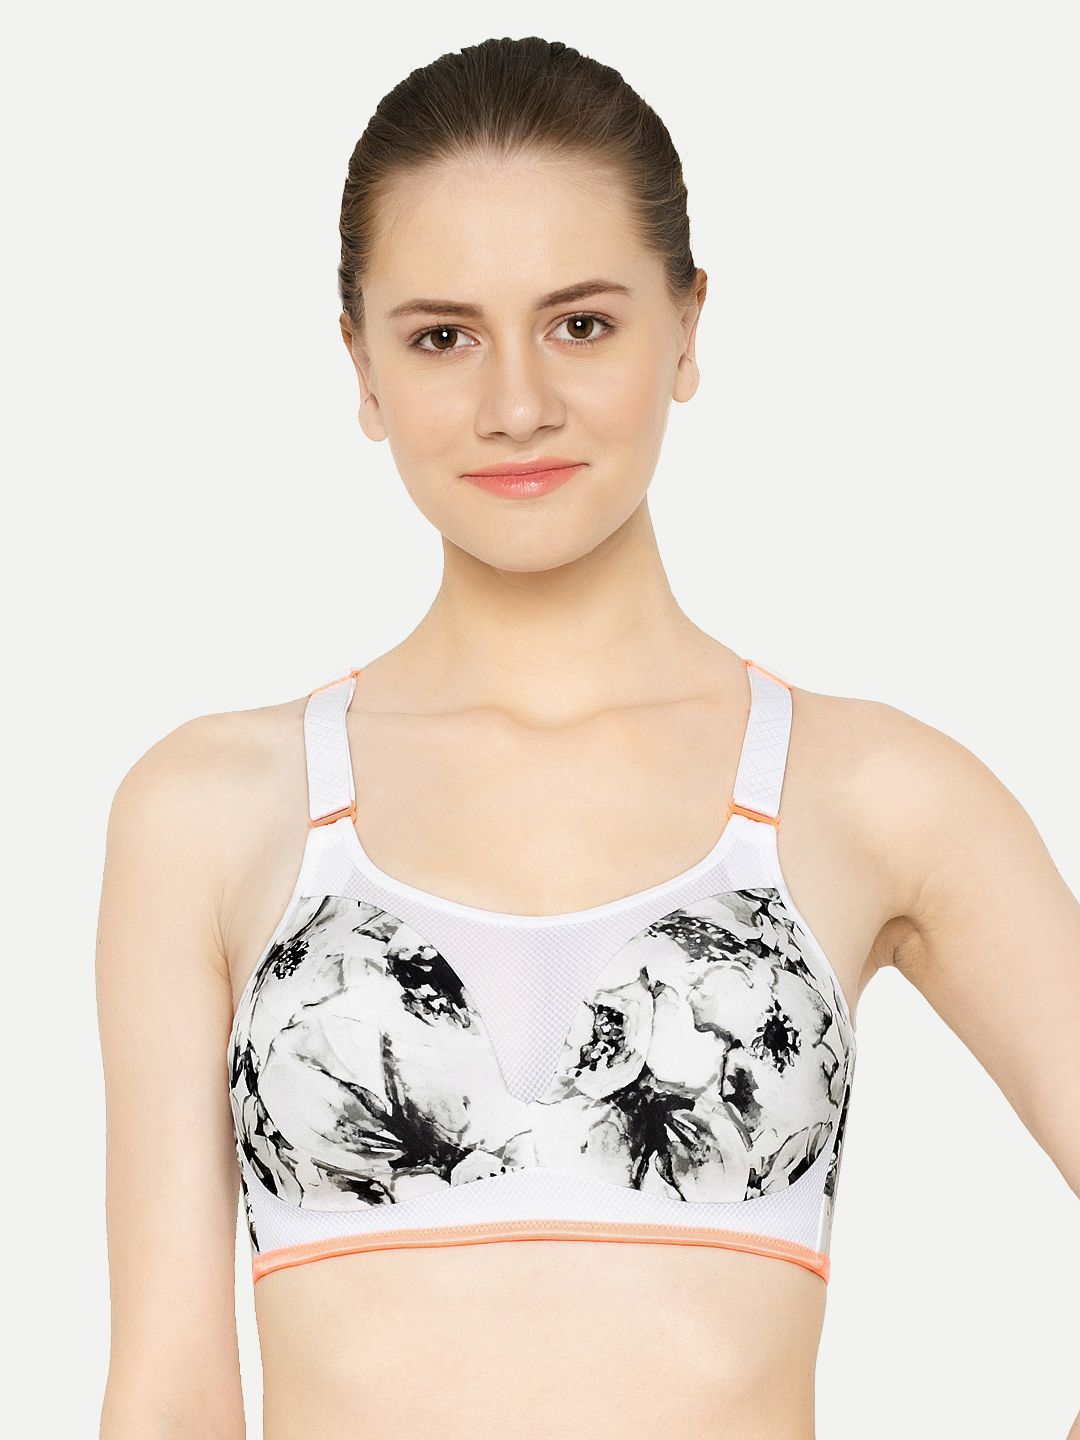 Triumph White Triaction Magic Motion Pro Magic-Wired Padded Control Cross-Back Sports Bra Price in India